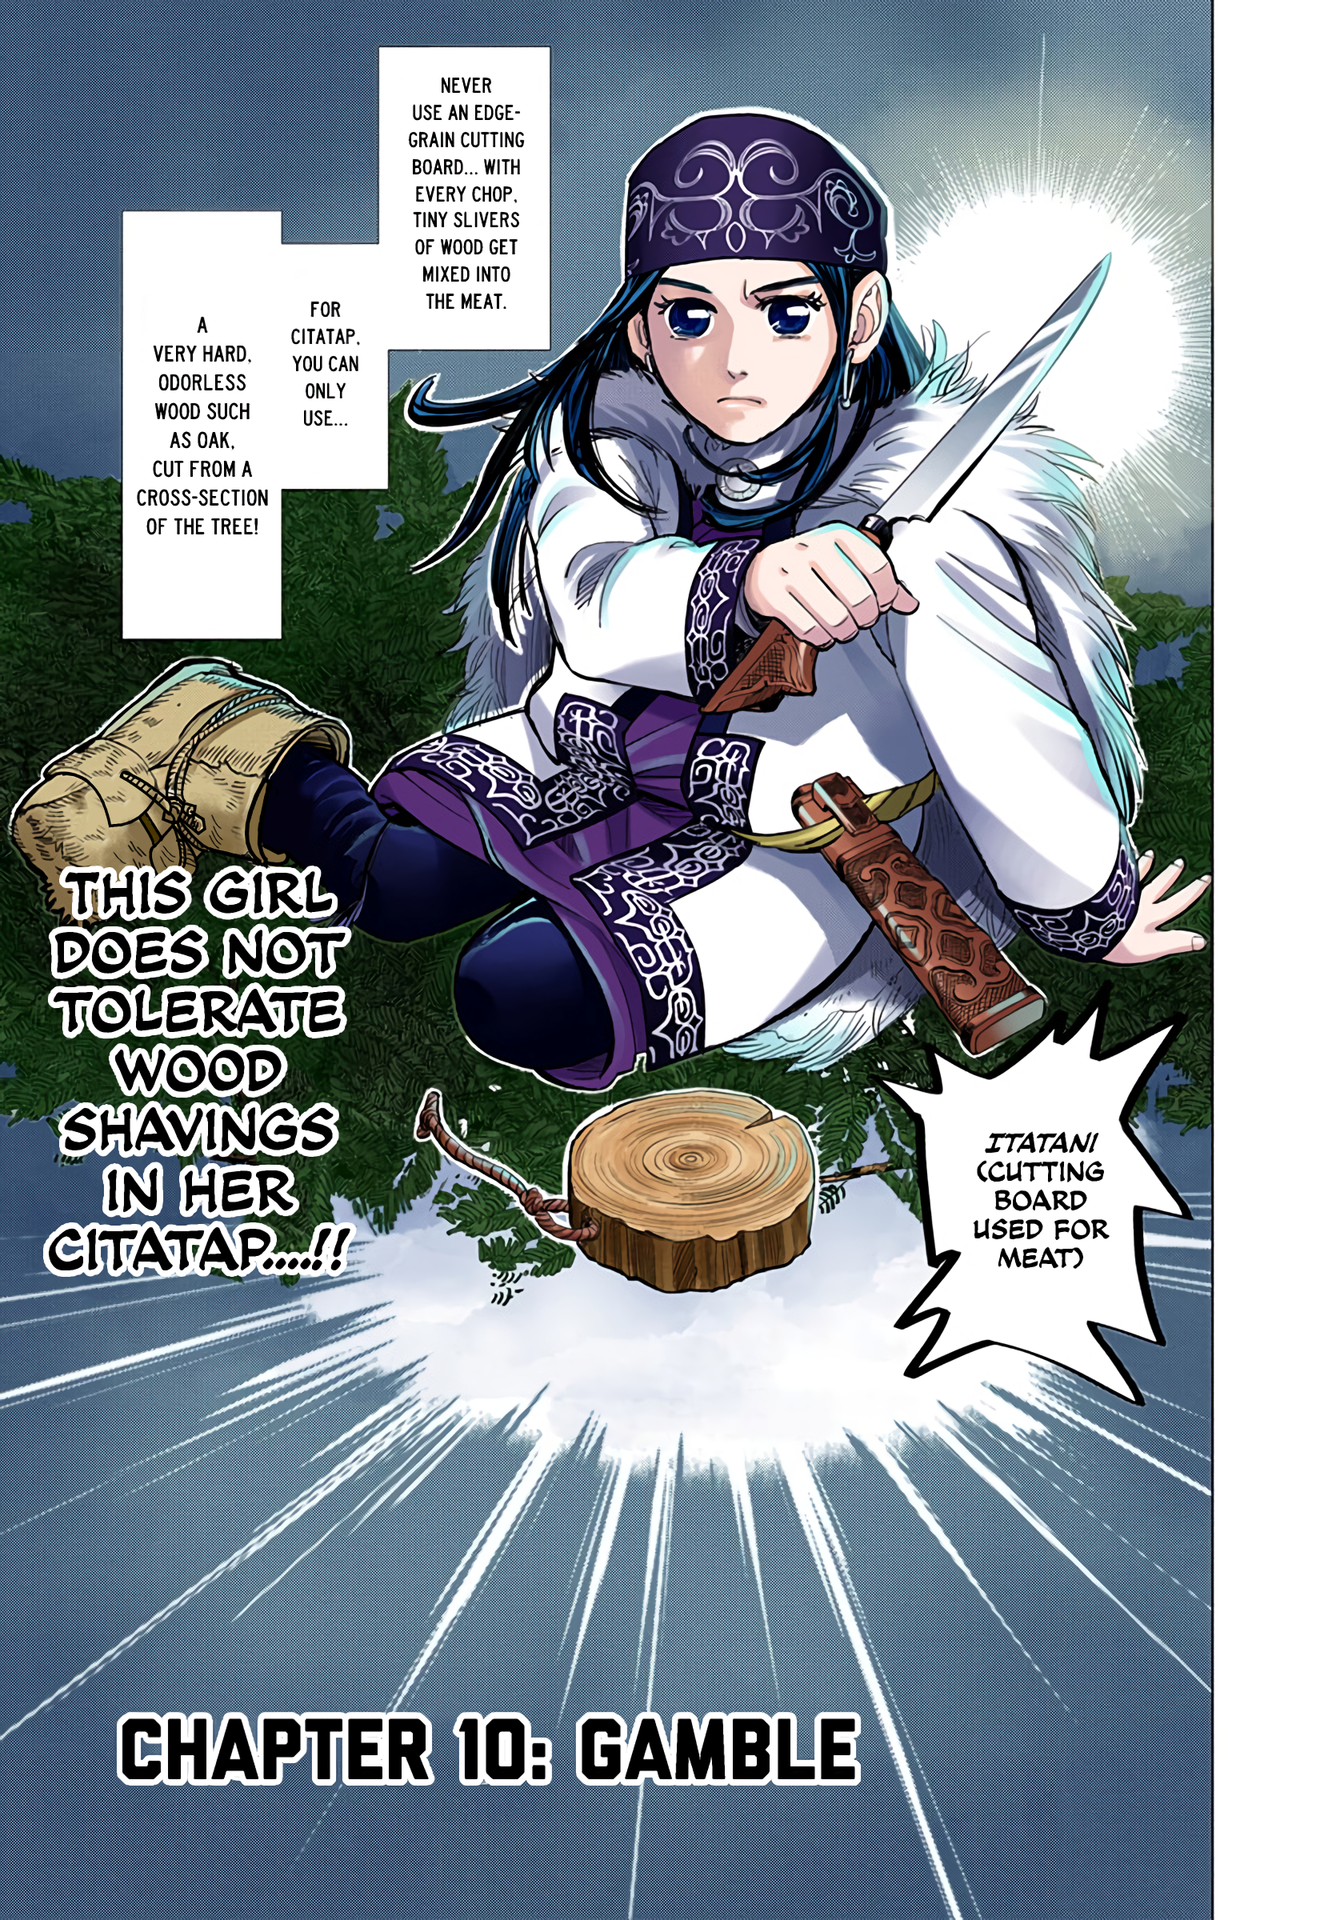 Golden Kamuy - Digital Colored Comics - Page 1